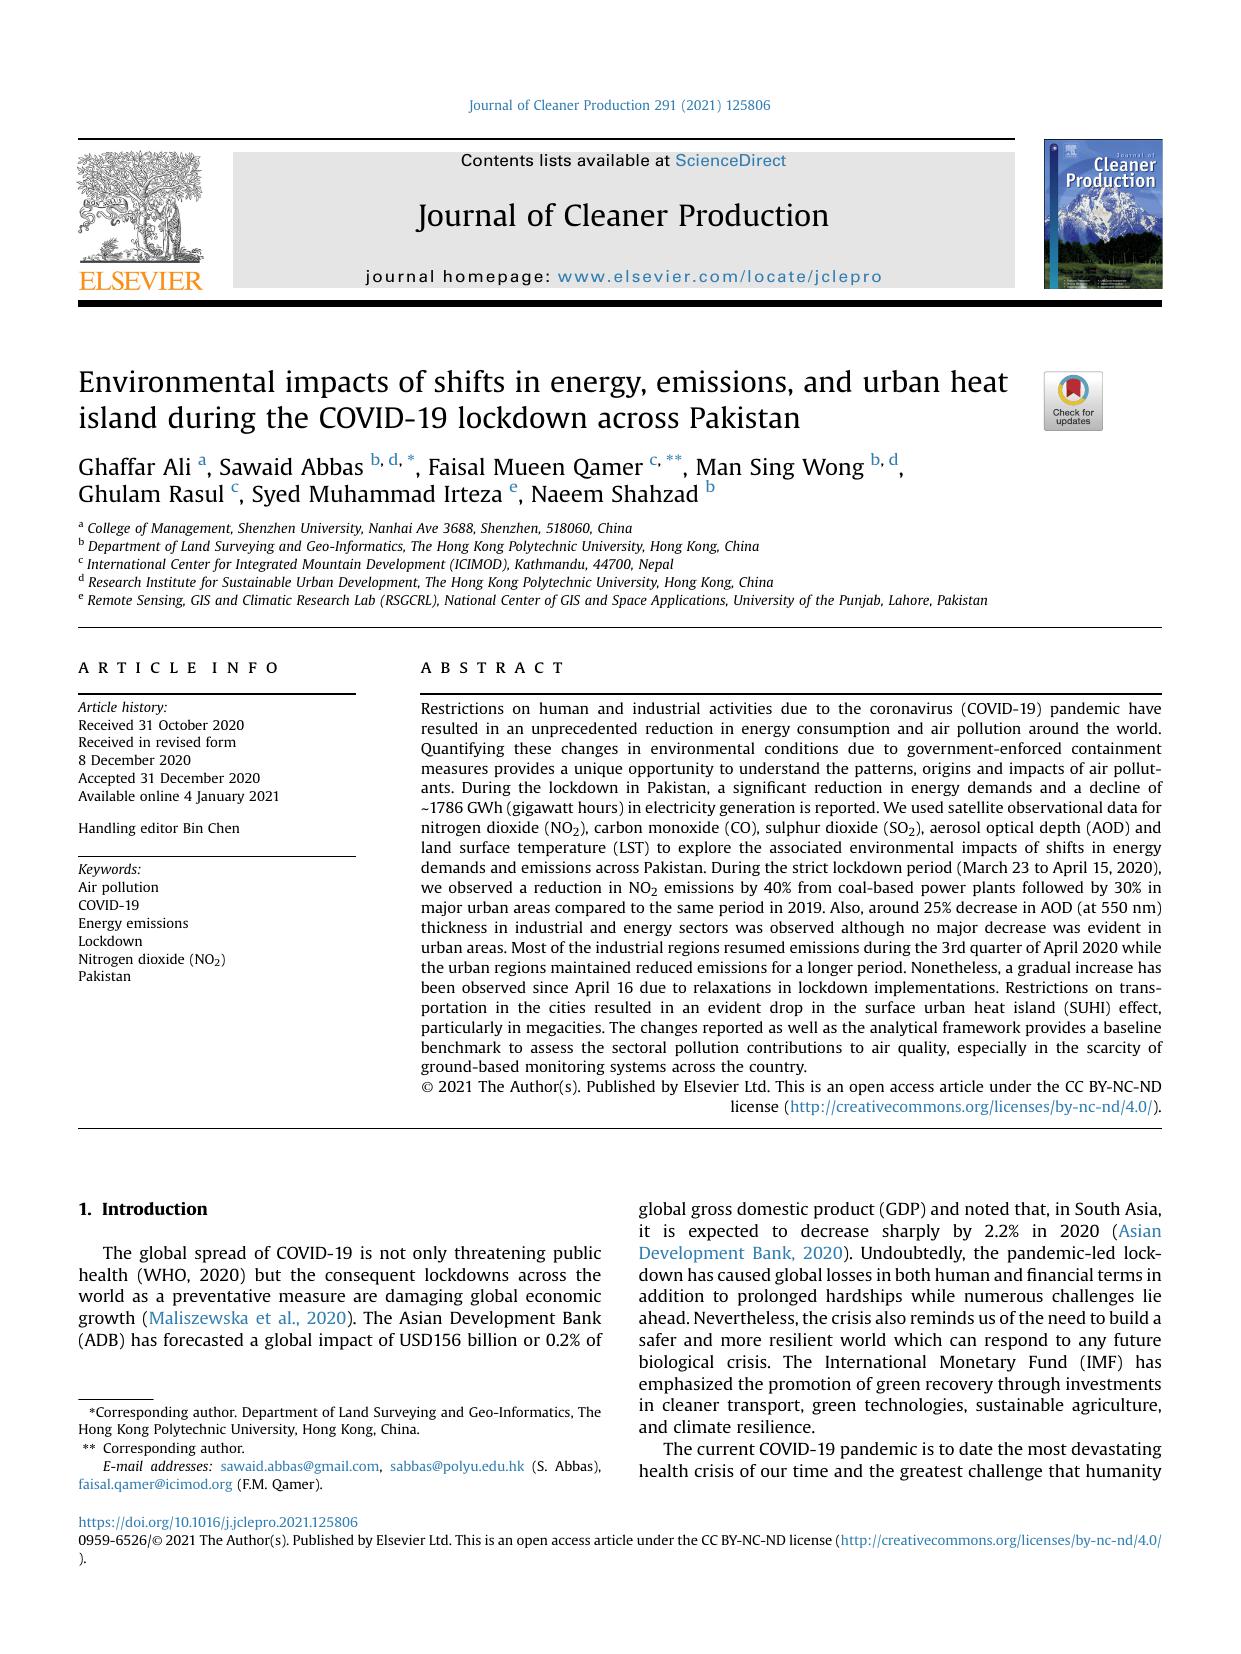 Environmental impacts of shifts in energy, emissions, and urban heat island during the COVID-19 lockdown across Pakistan